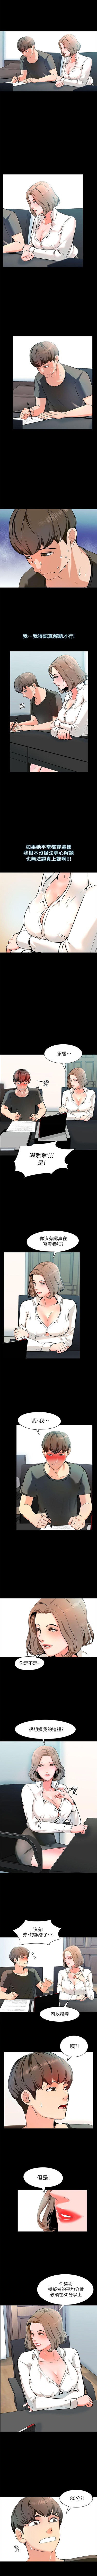 Young Tits 家教老師 1-38 官方中文（連載中） Art - Page 6